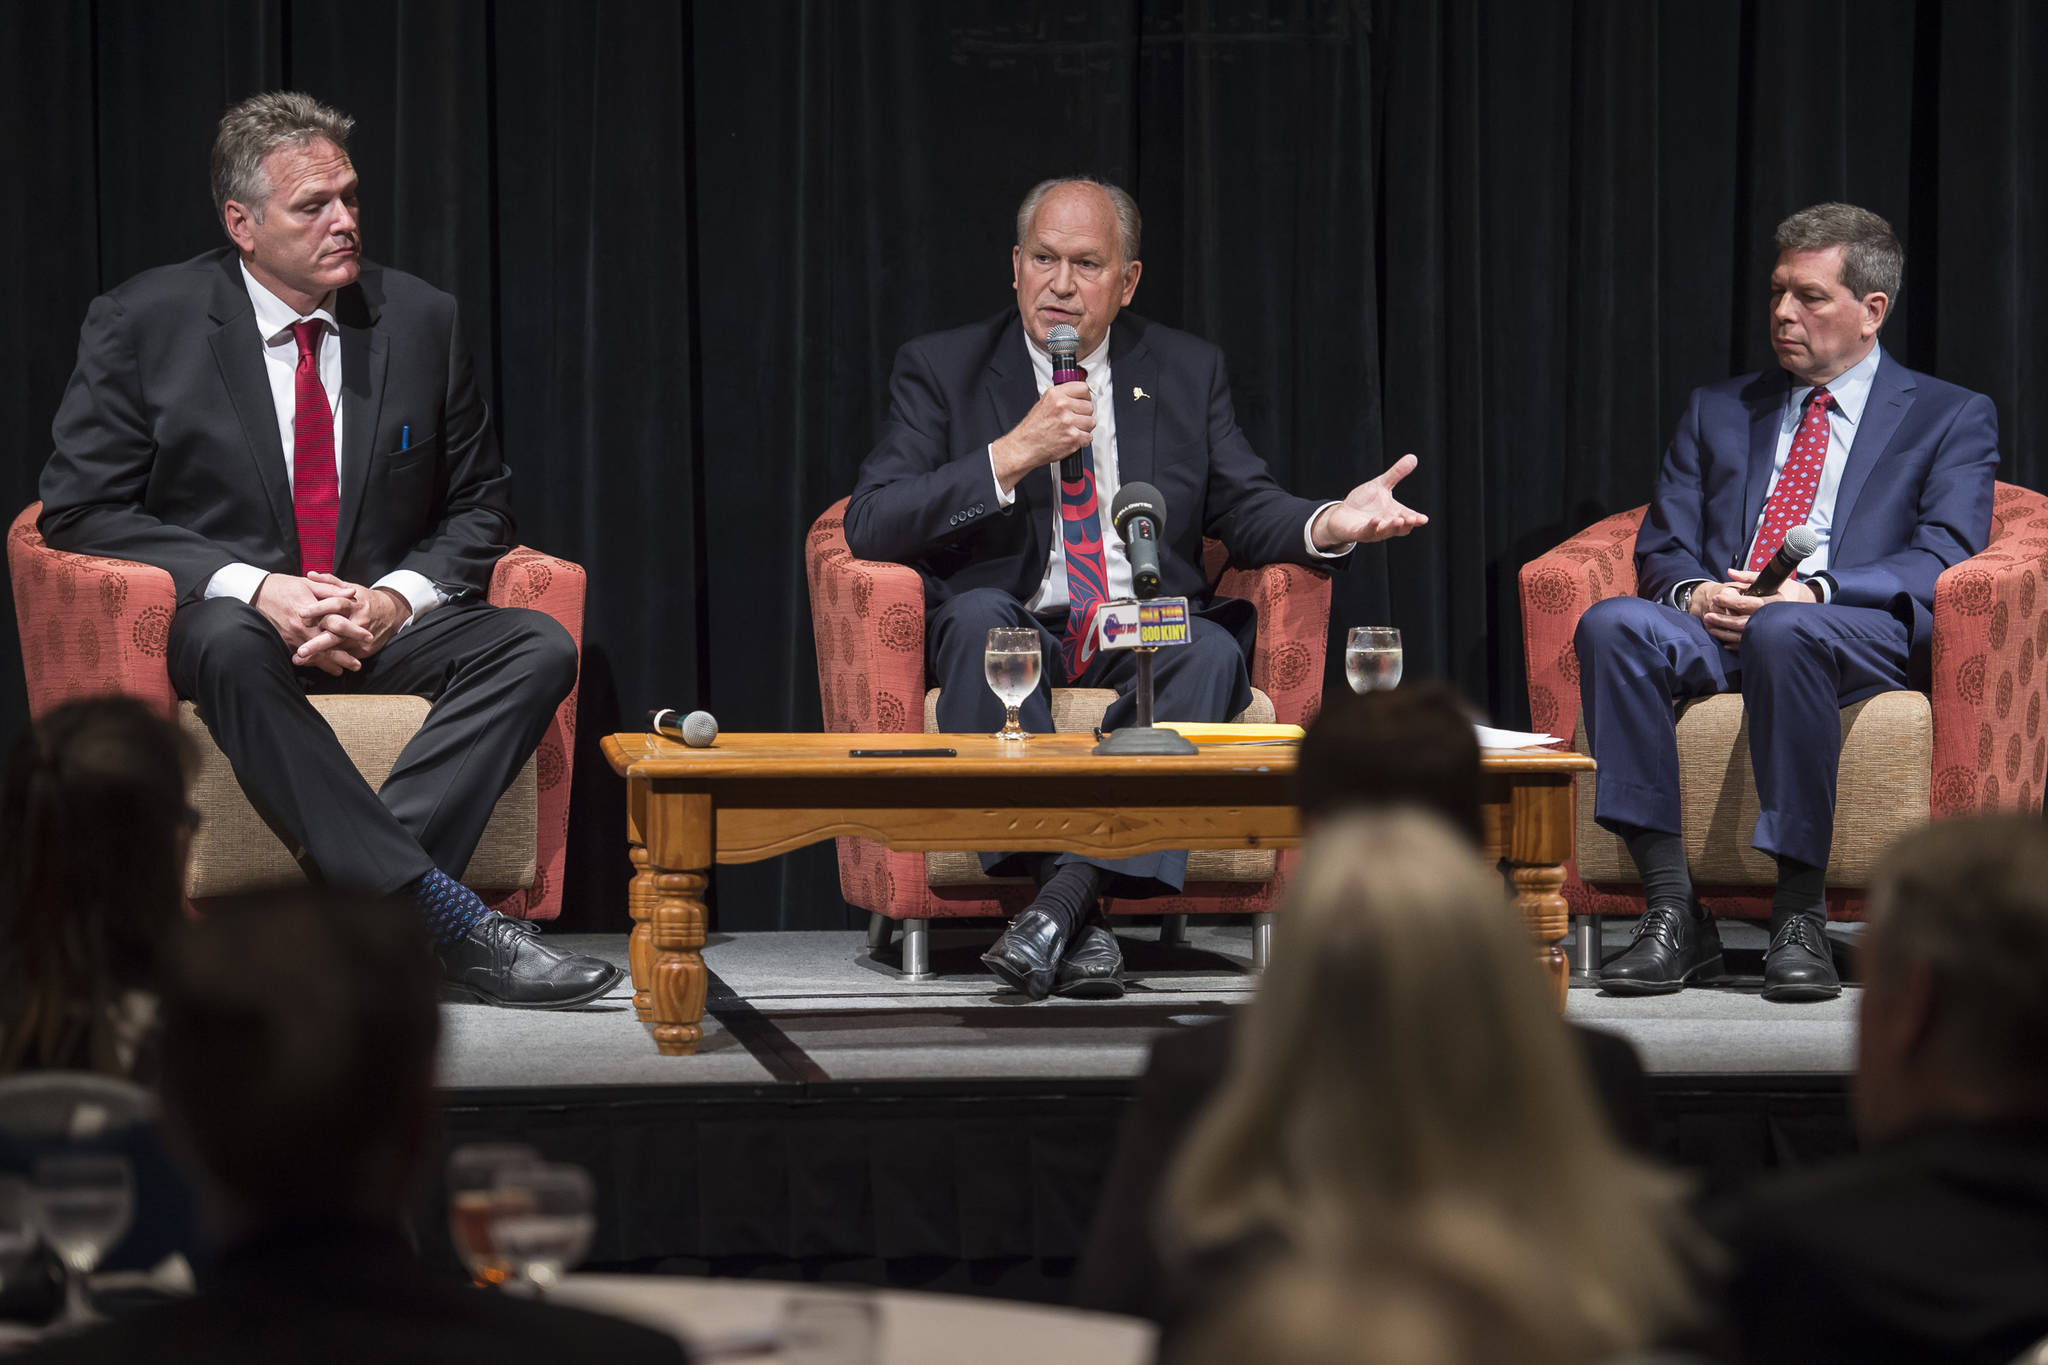 Former state Senate Mike Dunleavy, left, Gov. Bill Walker, center, and former U.S. Senator Mark Begich debate during a Juneau Chamber of Commerce luncheon at Centennial Hall on Thursday, Sept. 6, 2018. Polls and financial disclosure forms show Dunleavy with a significant lead in the four-way governor’s race. (Michael Penn | Juneau Empire)